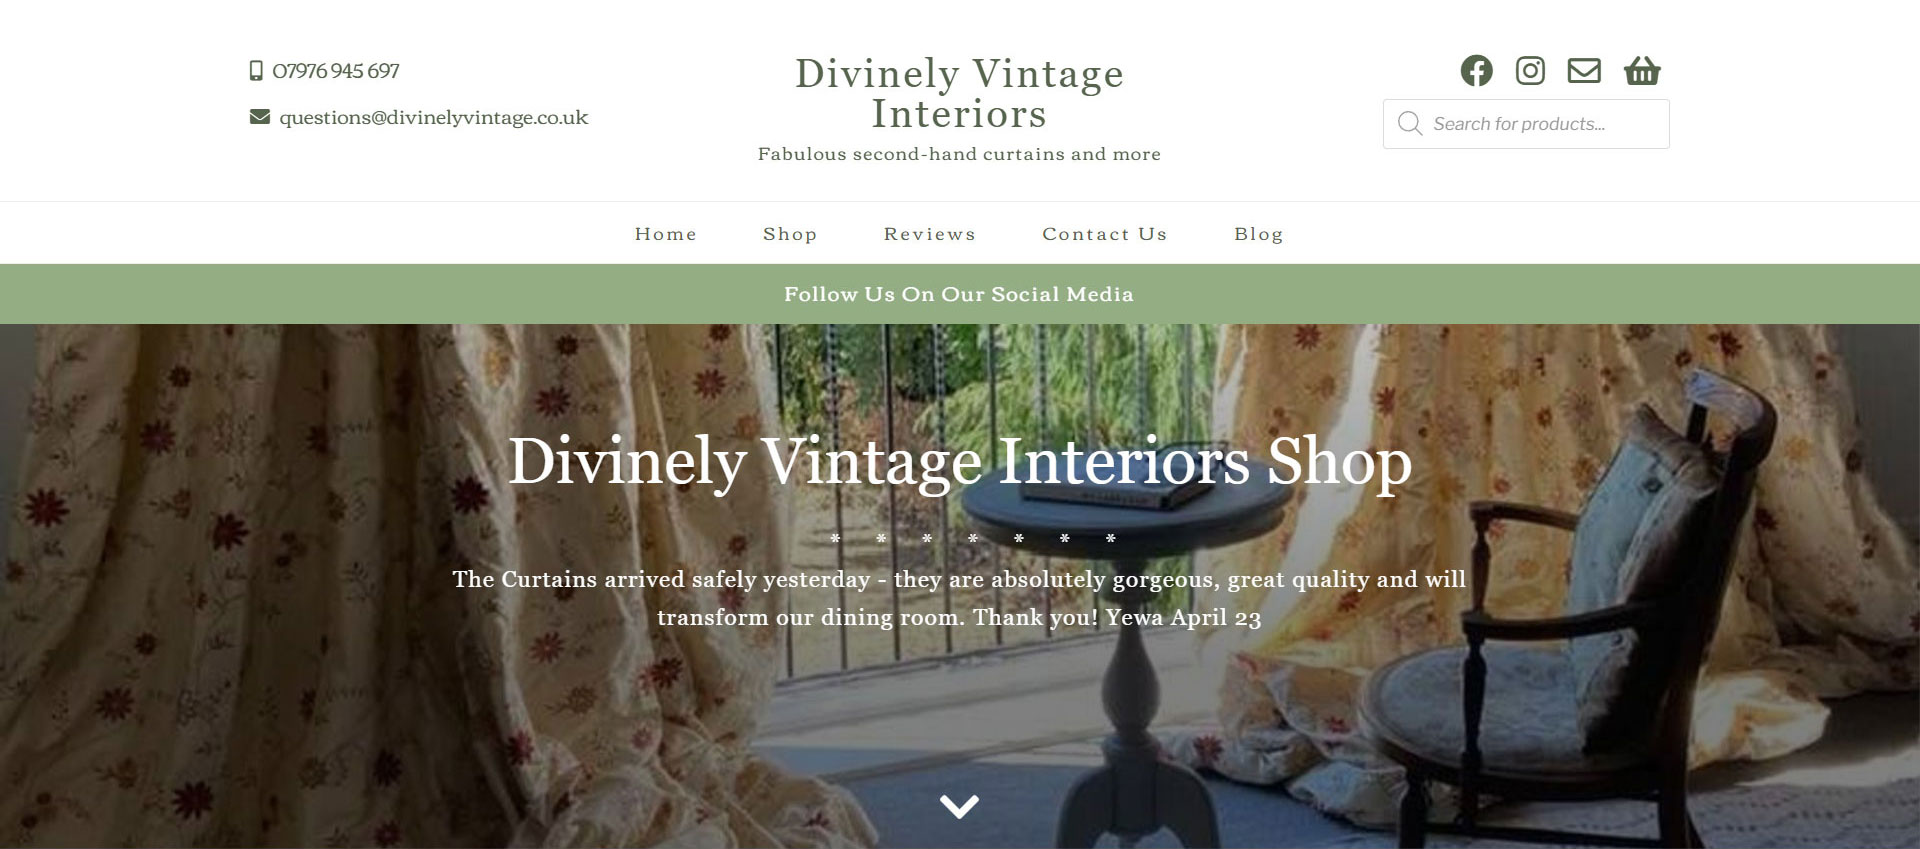 Divinely Vintage Interiors fabulous second-hand curtains